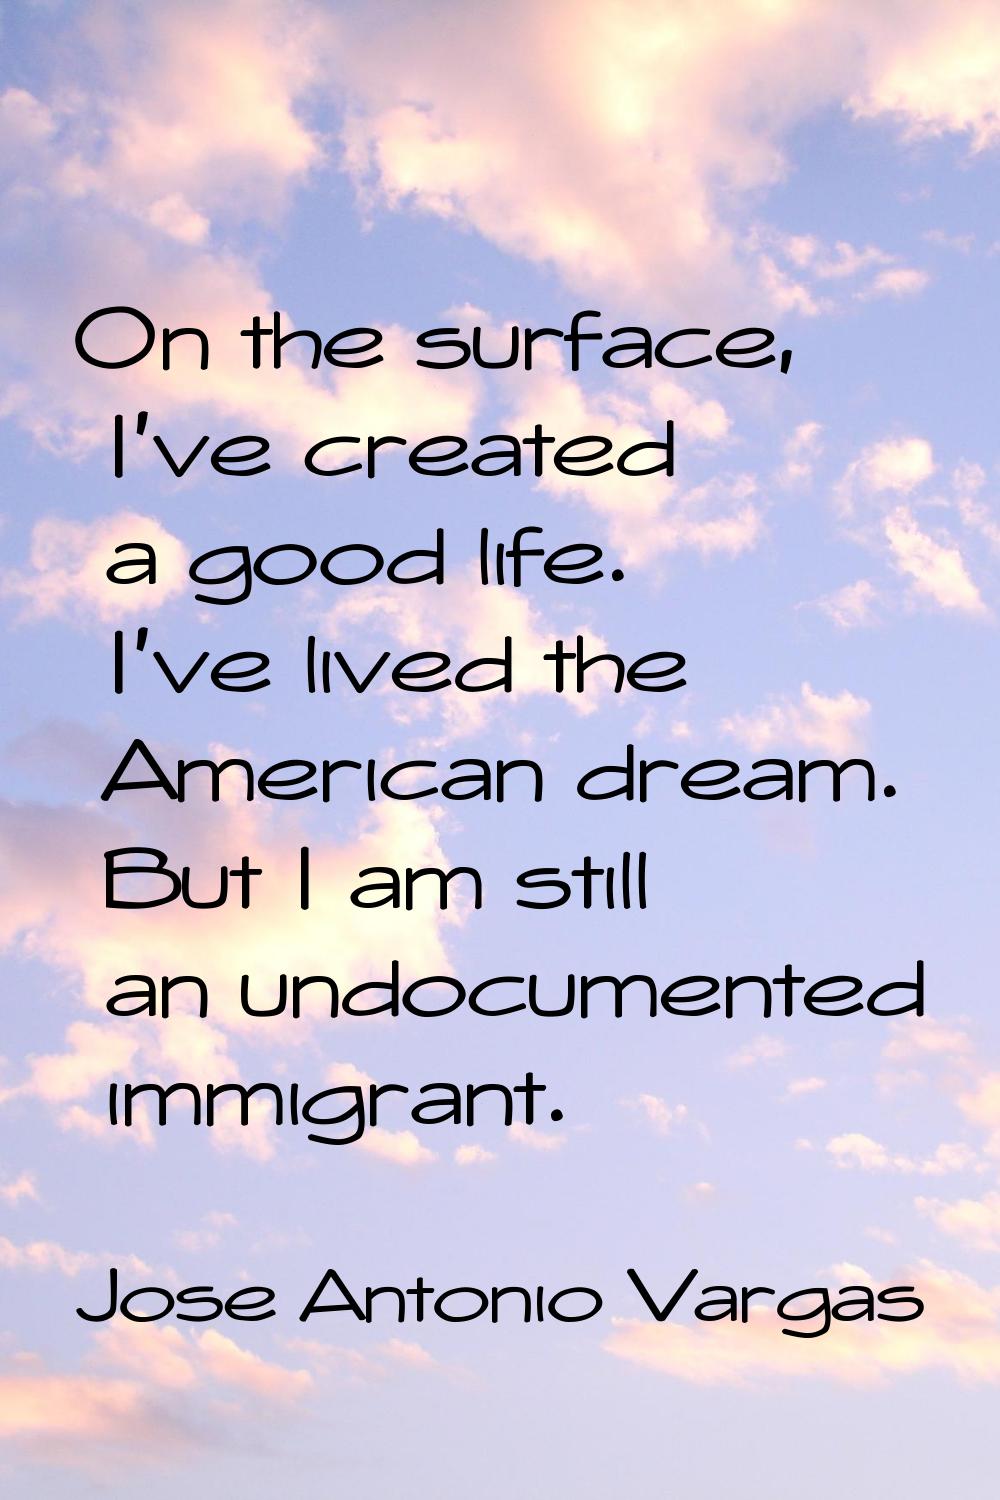 On the surface, I've created a good life. I've lived the American dream. But I am still an undocume